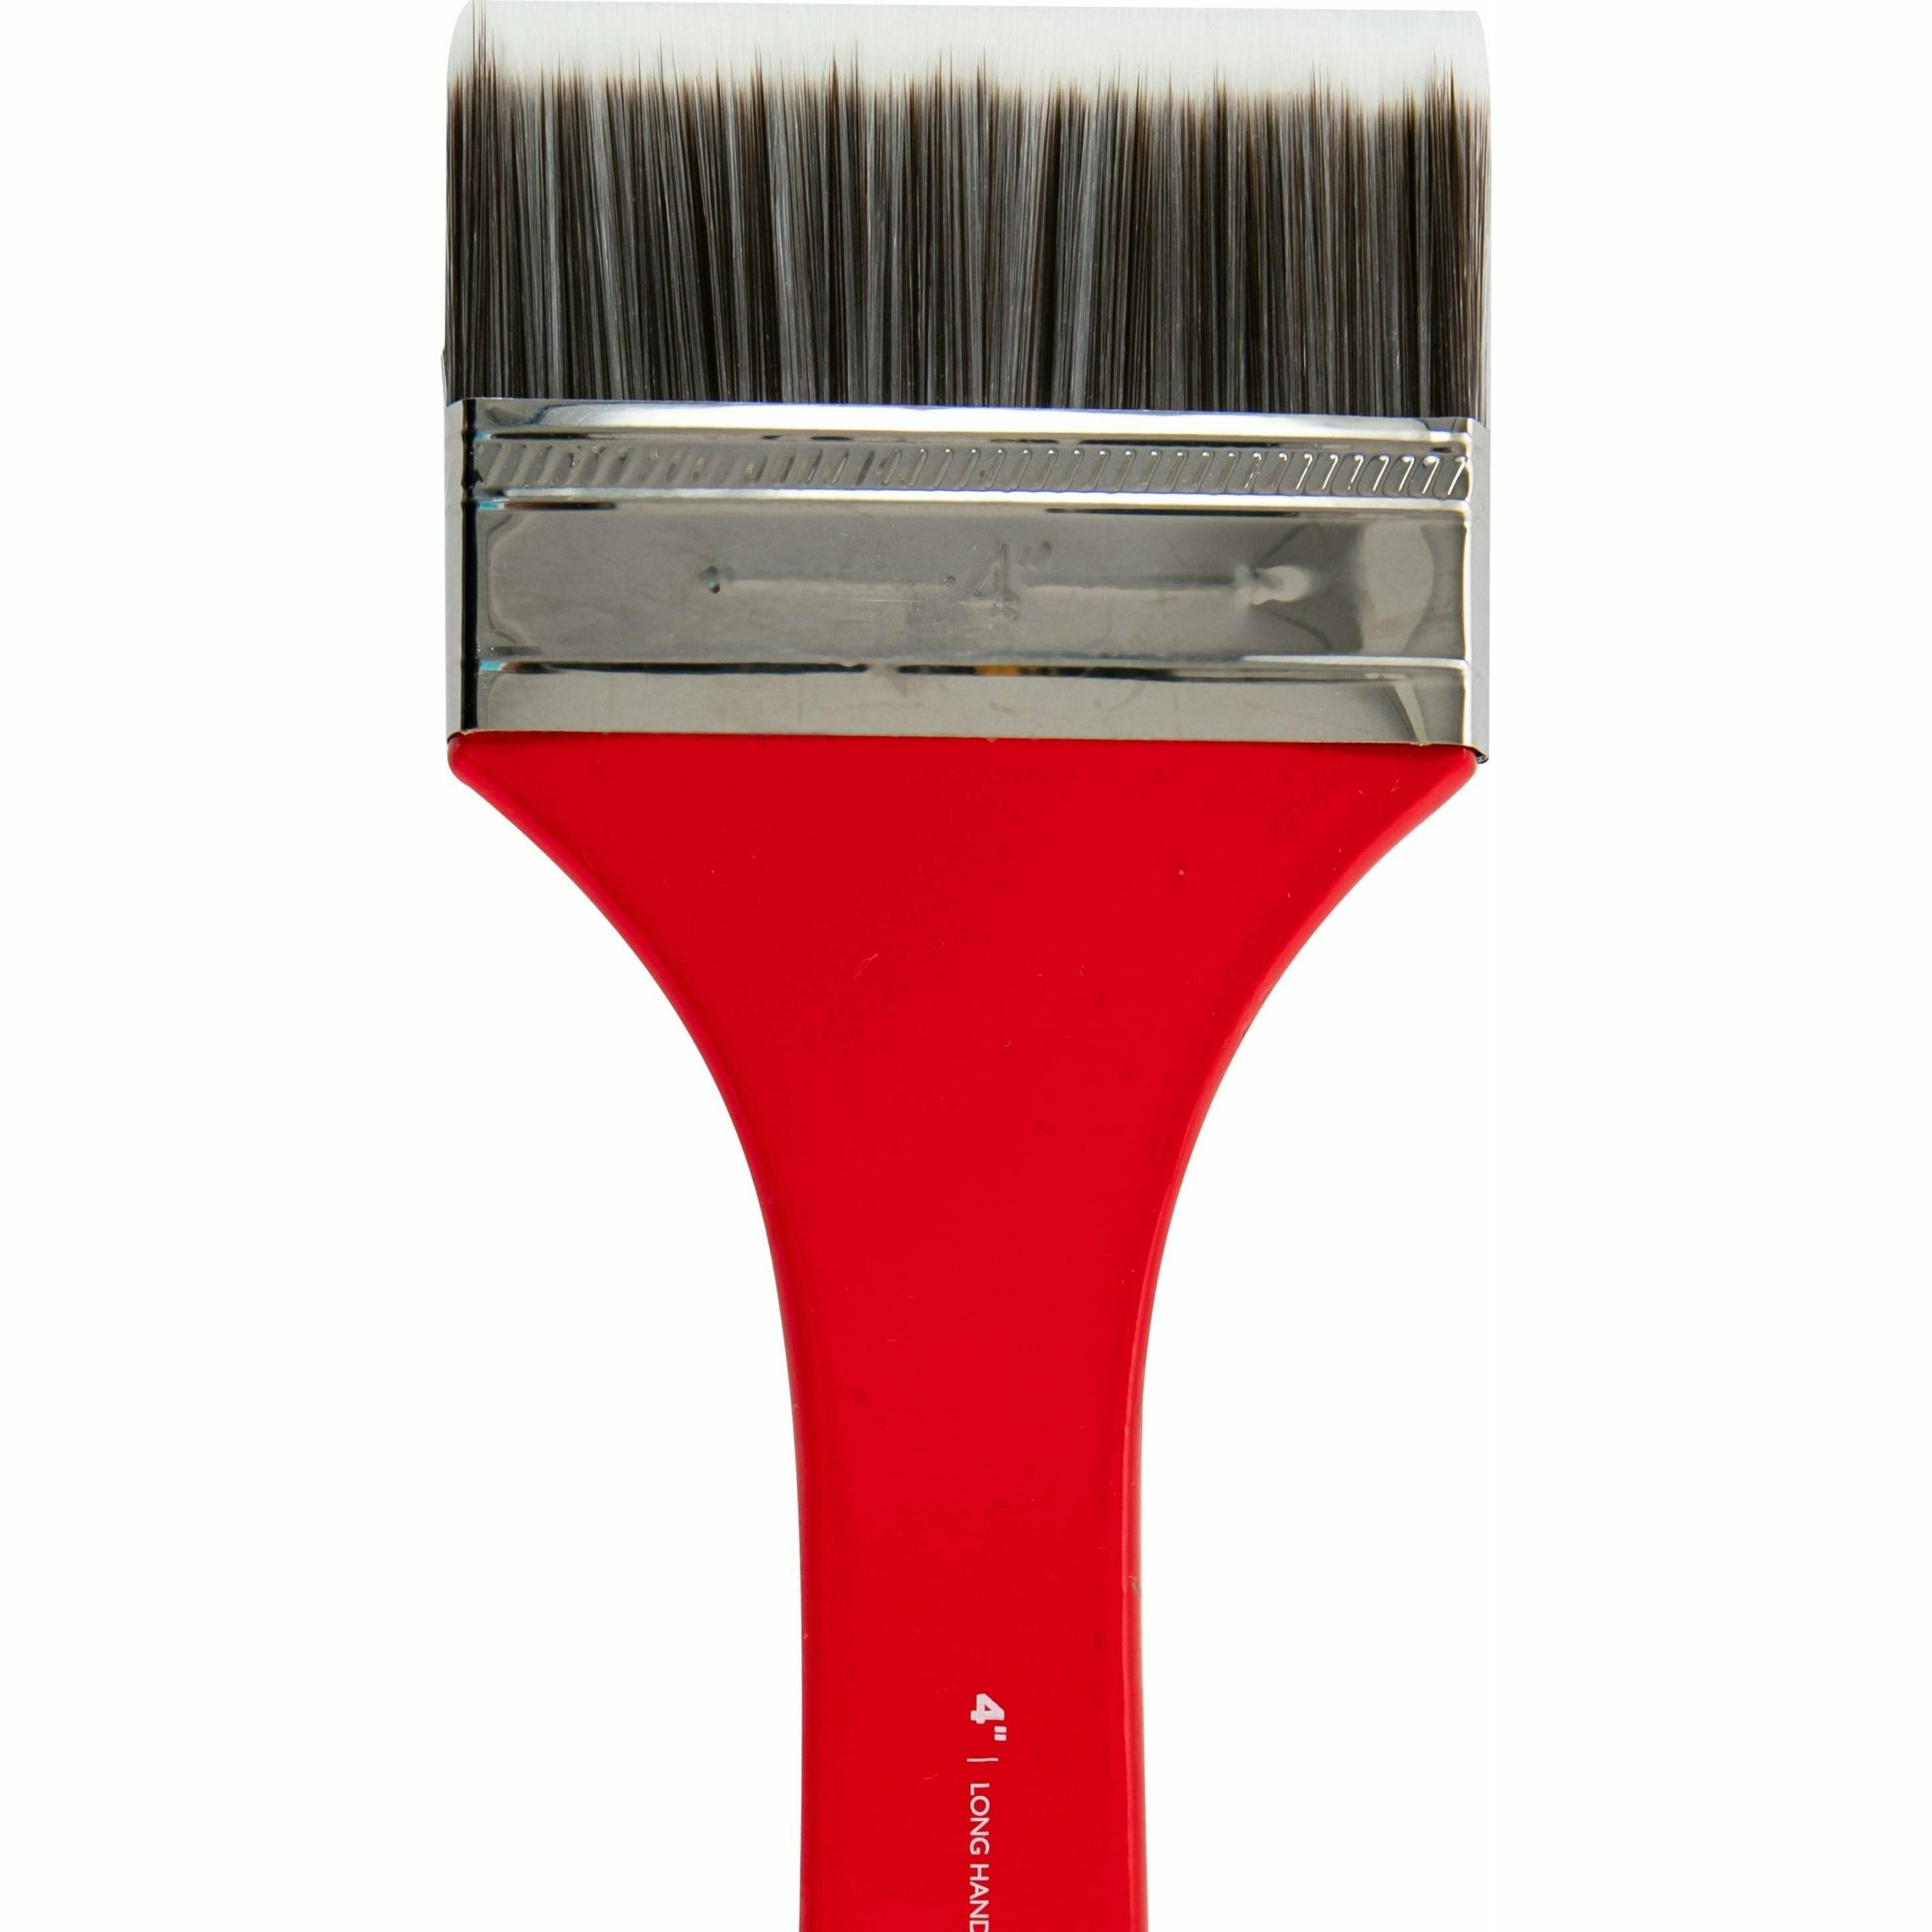 Get the newest Holcroft Long Handle Flat 2inch Red Brush 637 for less